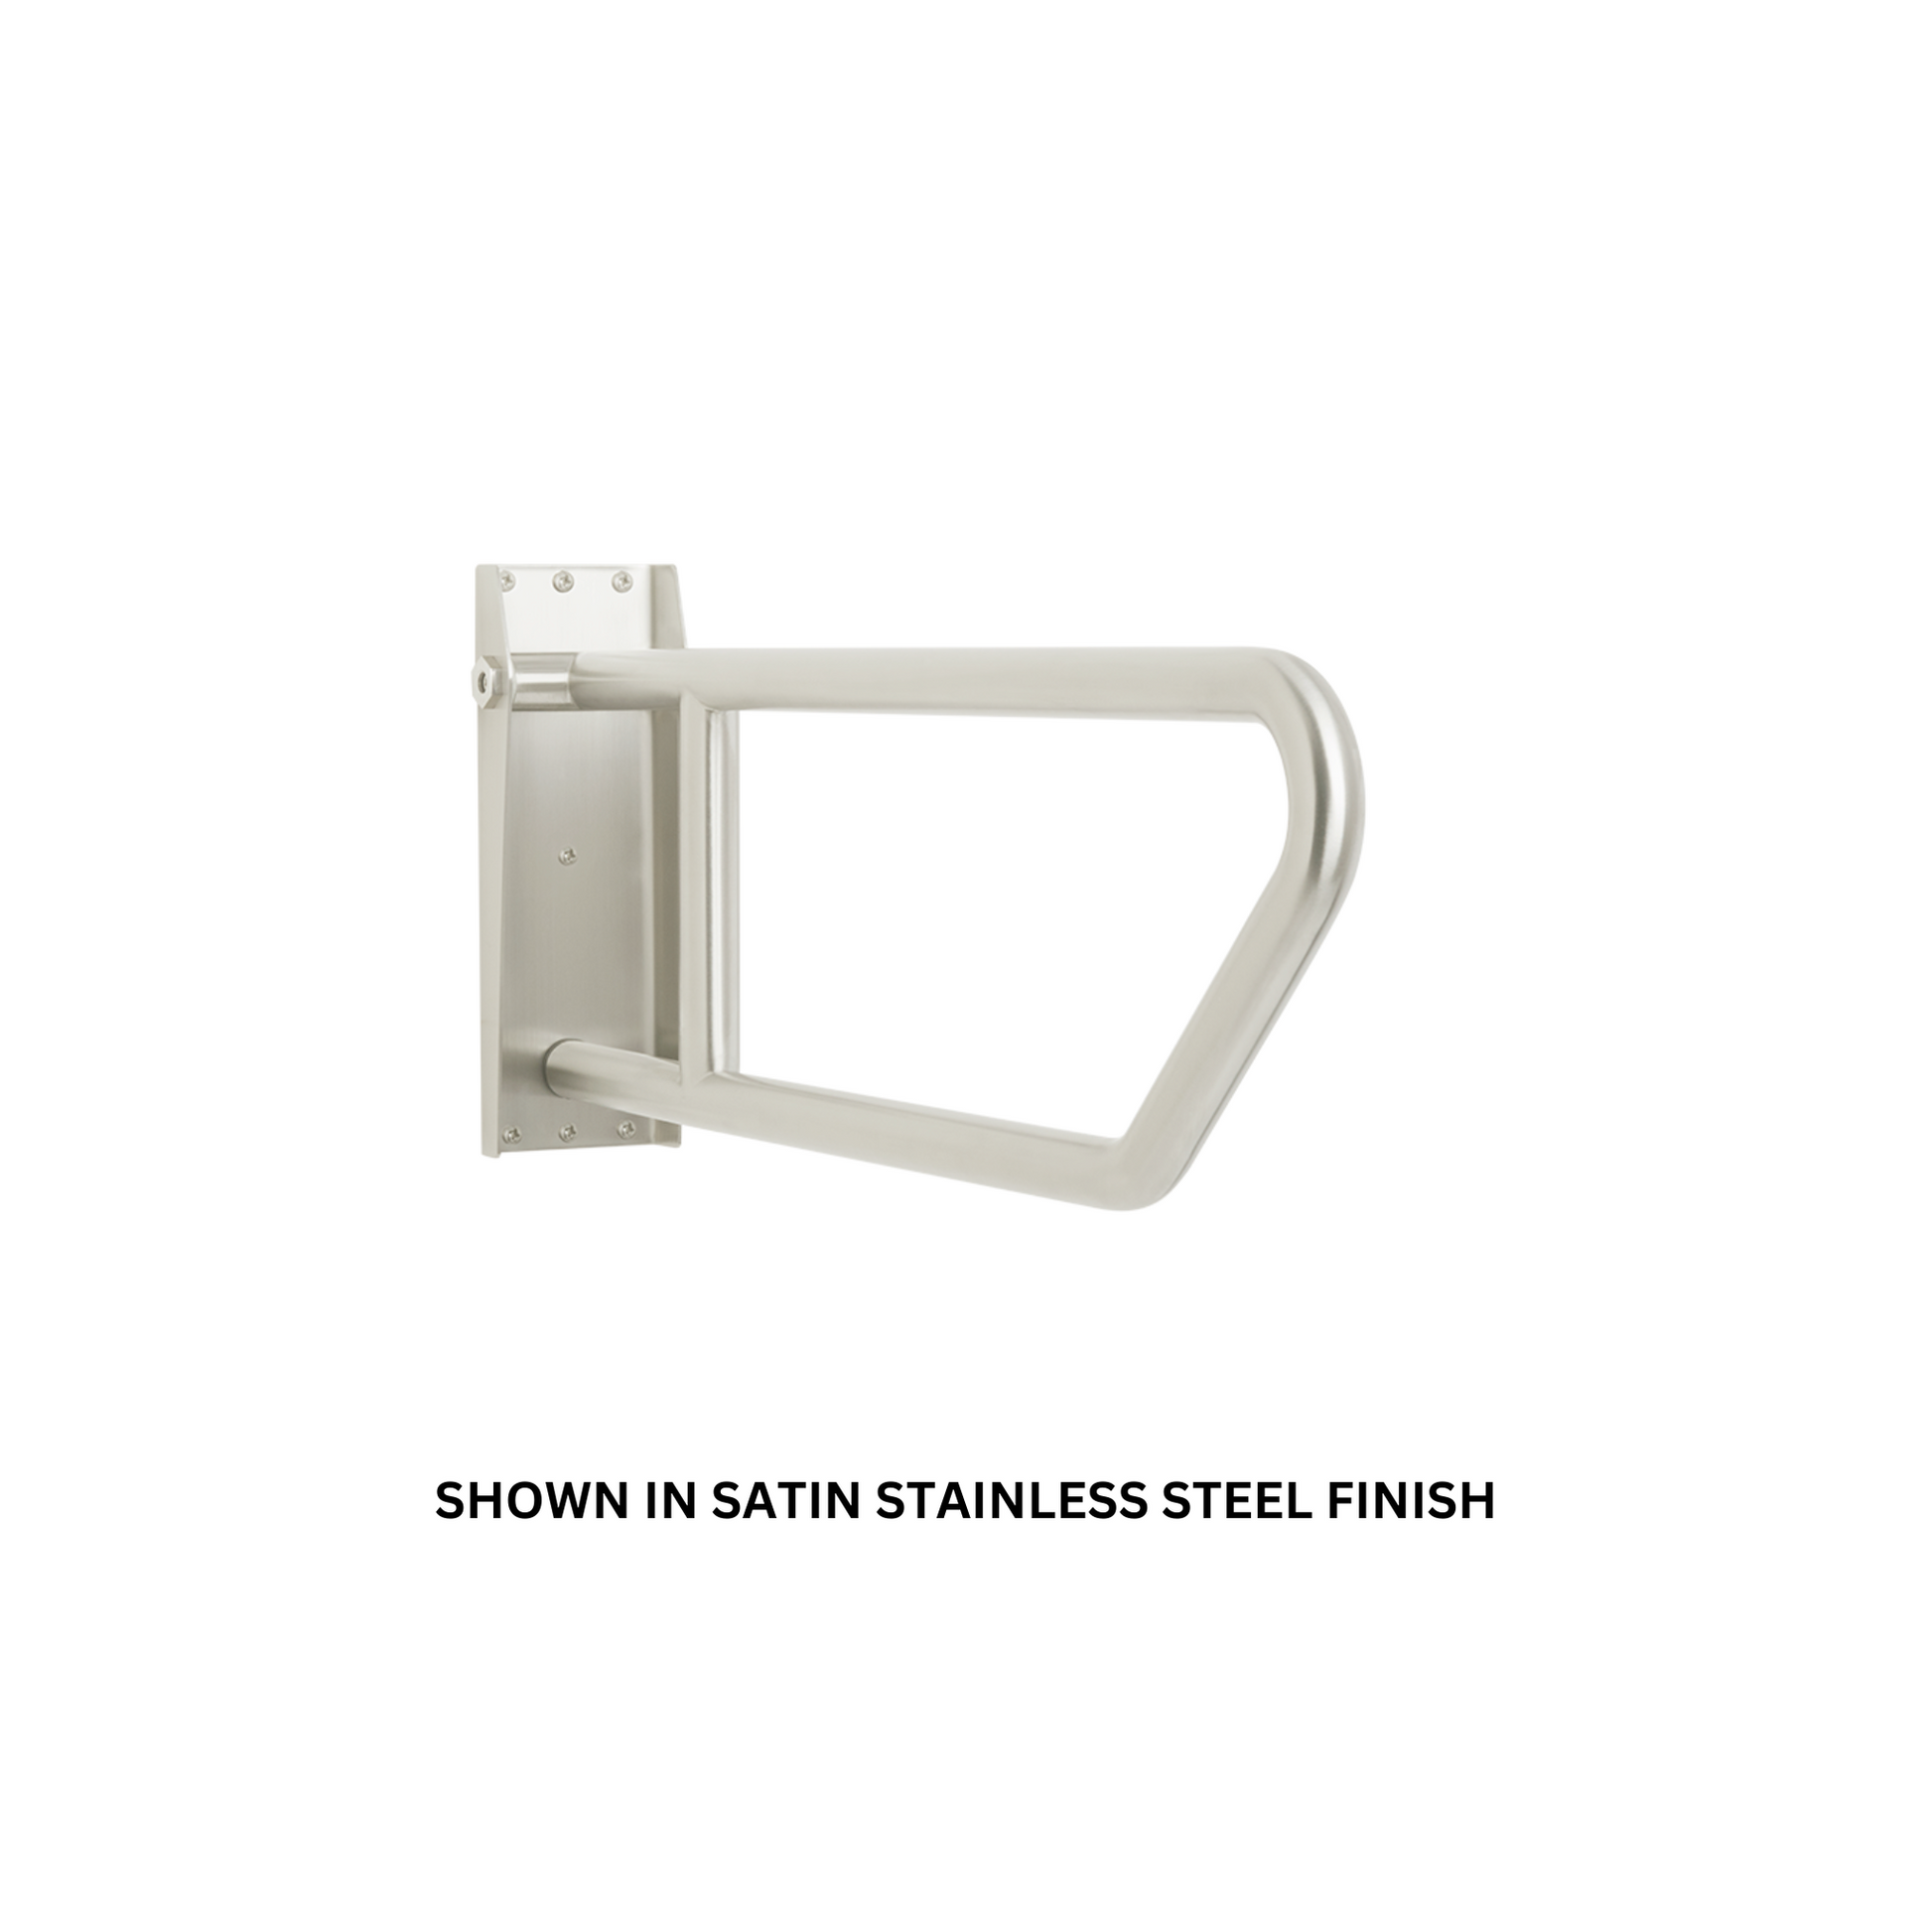 Seachrome Signature Series 30" x 10" Polished Stainless Steel Exposed Flange Swing-Up Grab Bar